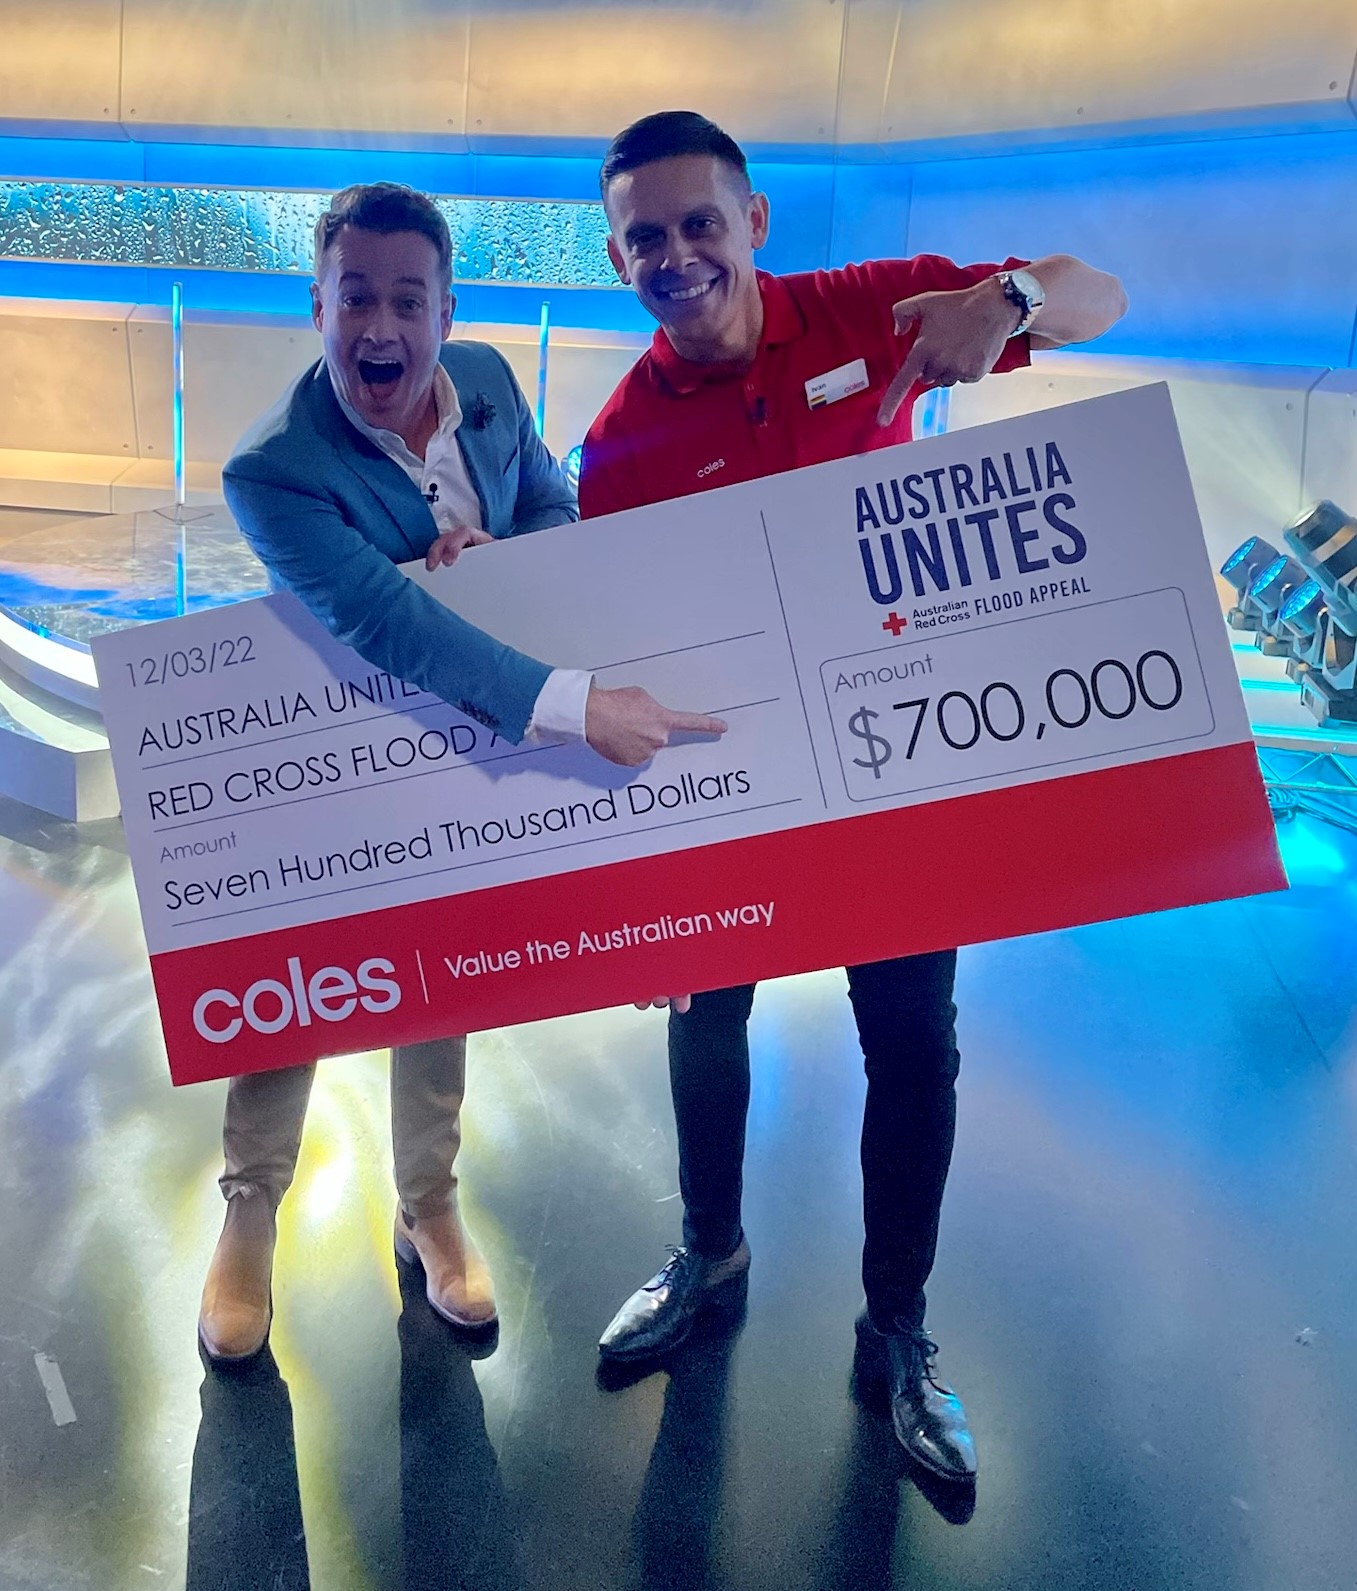 TV presenter Grant Denyer and Coles NSW General Manager Ivan Slunjski with $700,000 donation to Red Cross Flood Appeal